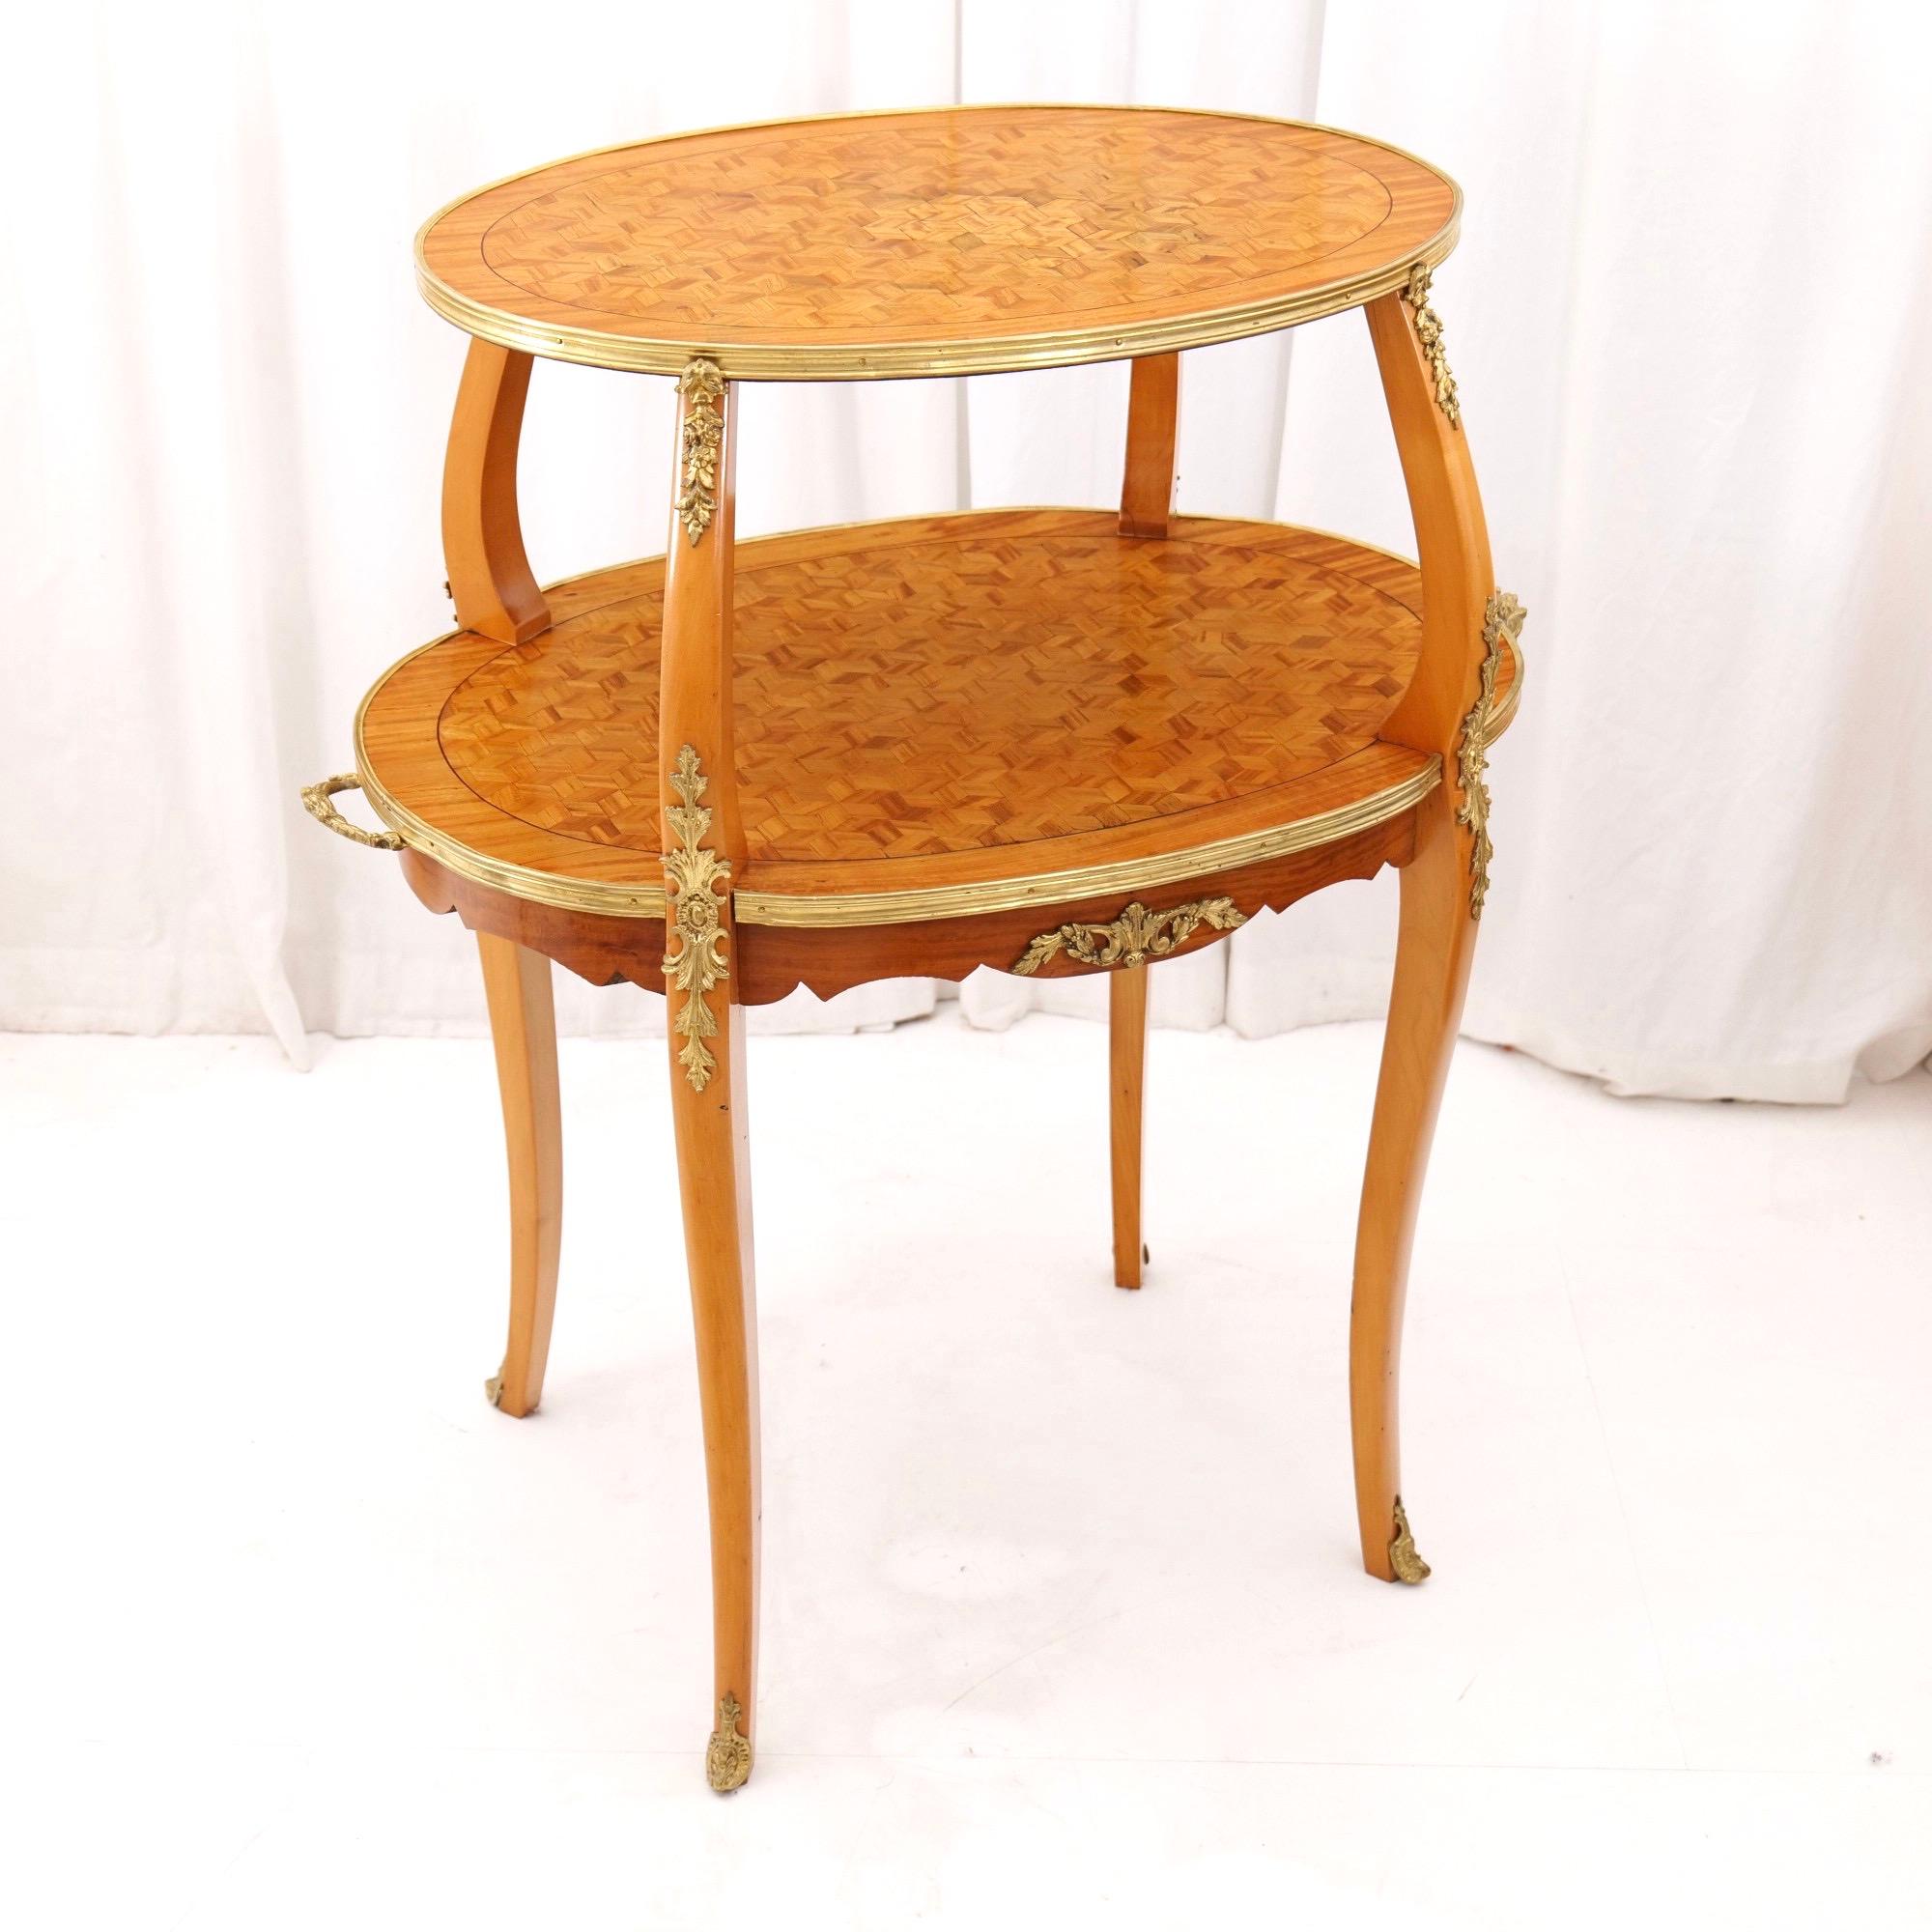 Neoclassical vintage french marquetry etagere tea table in lemon wood 